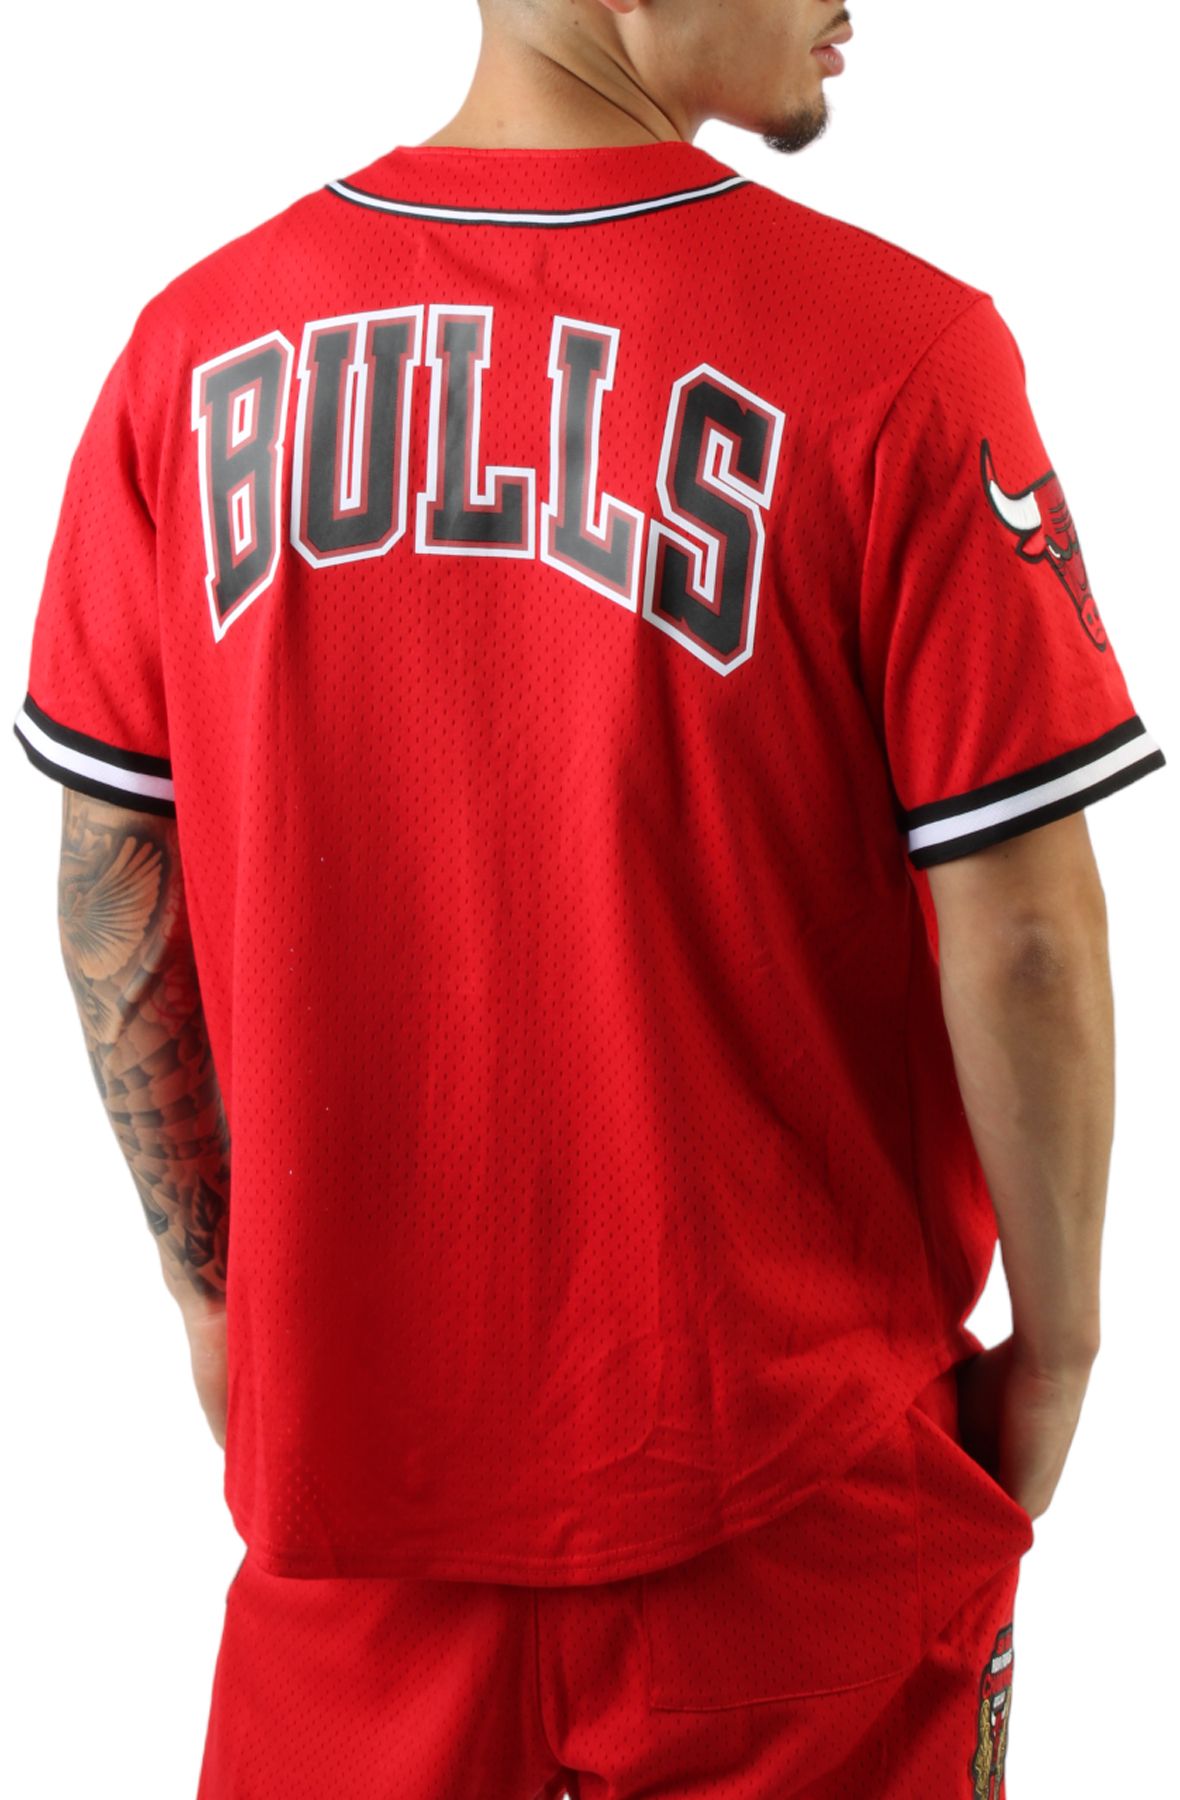 Chicago Bulls Pro Standard Ombre Mesh Button-Up Shirt - Black/Red